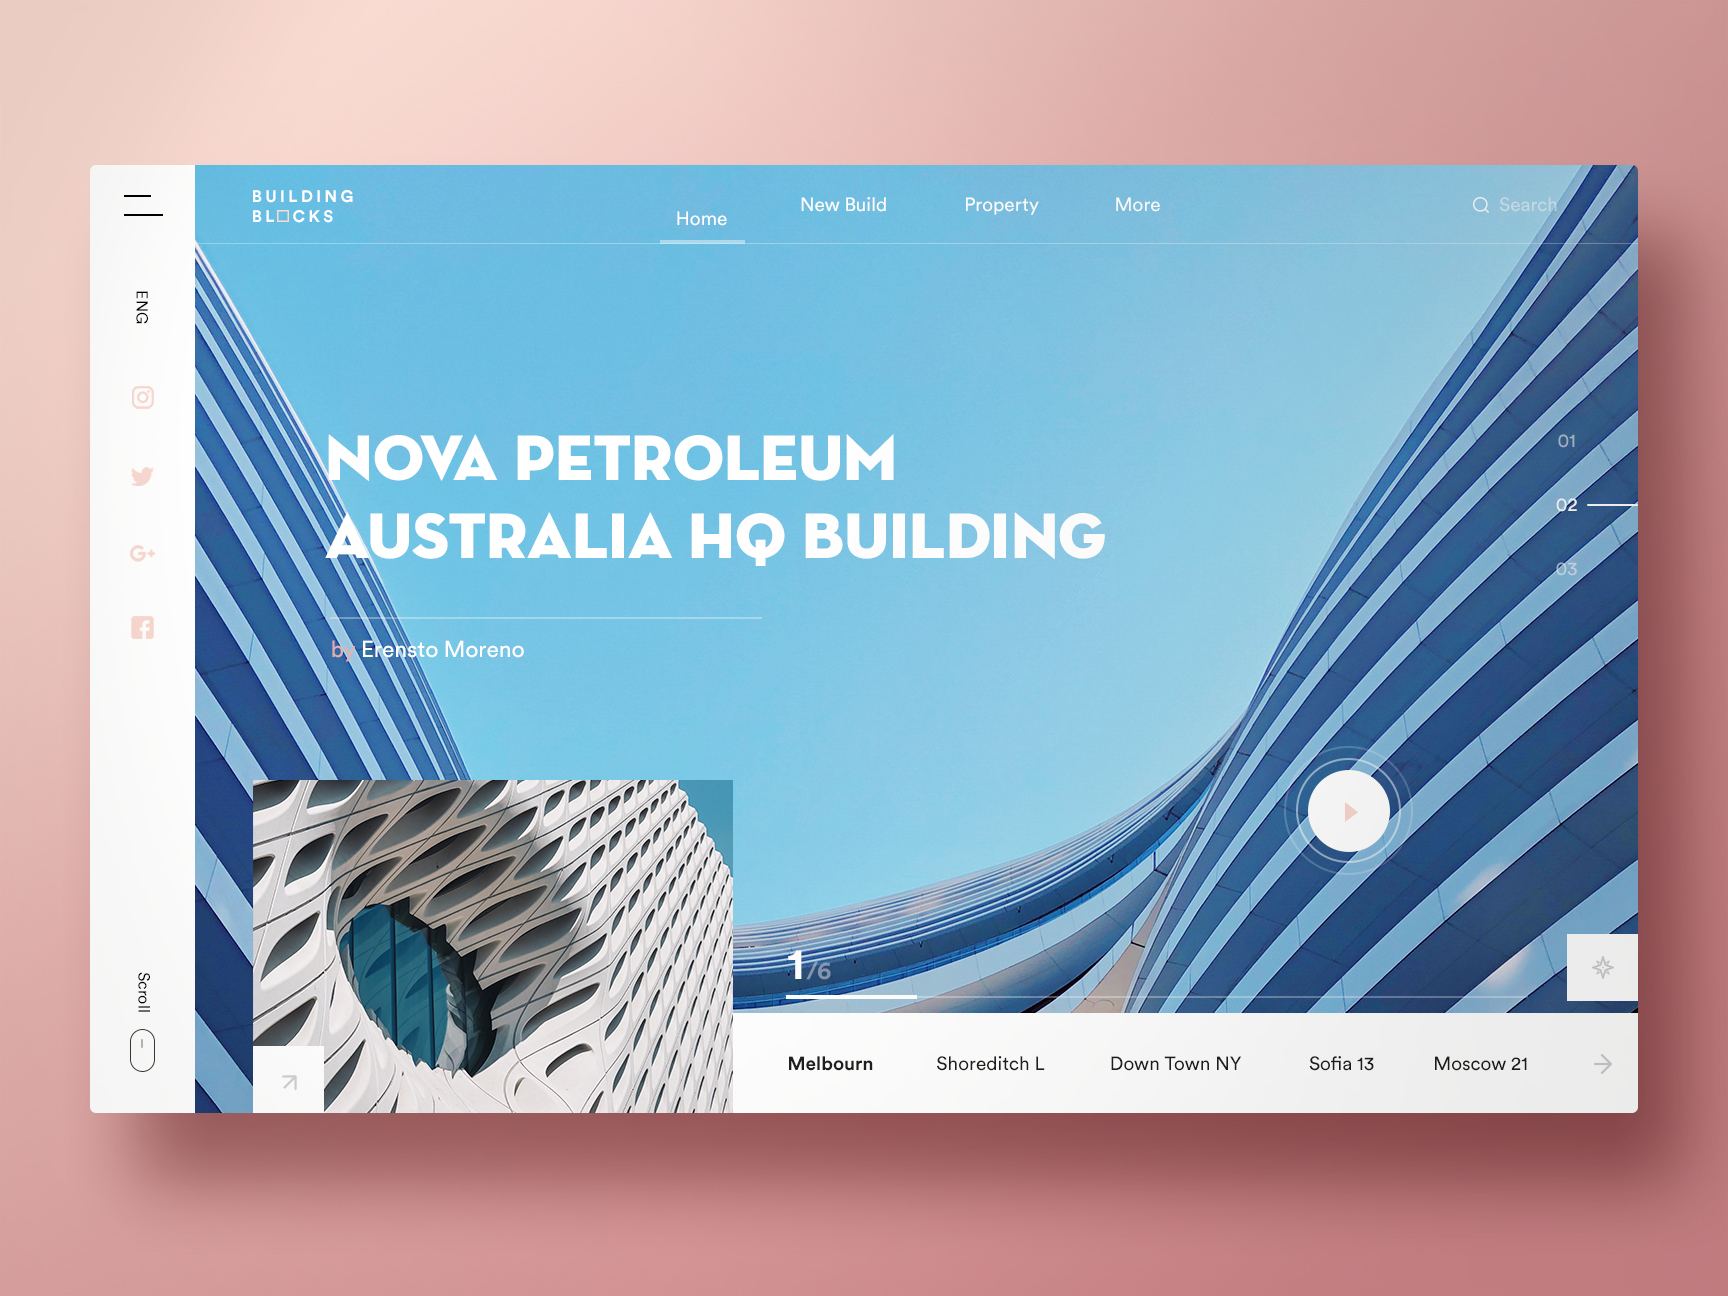 Profile Page screen design idea #71: Visual Design Inspiration for your Monday Morning